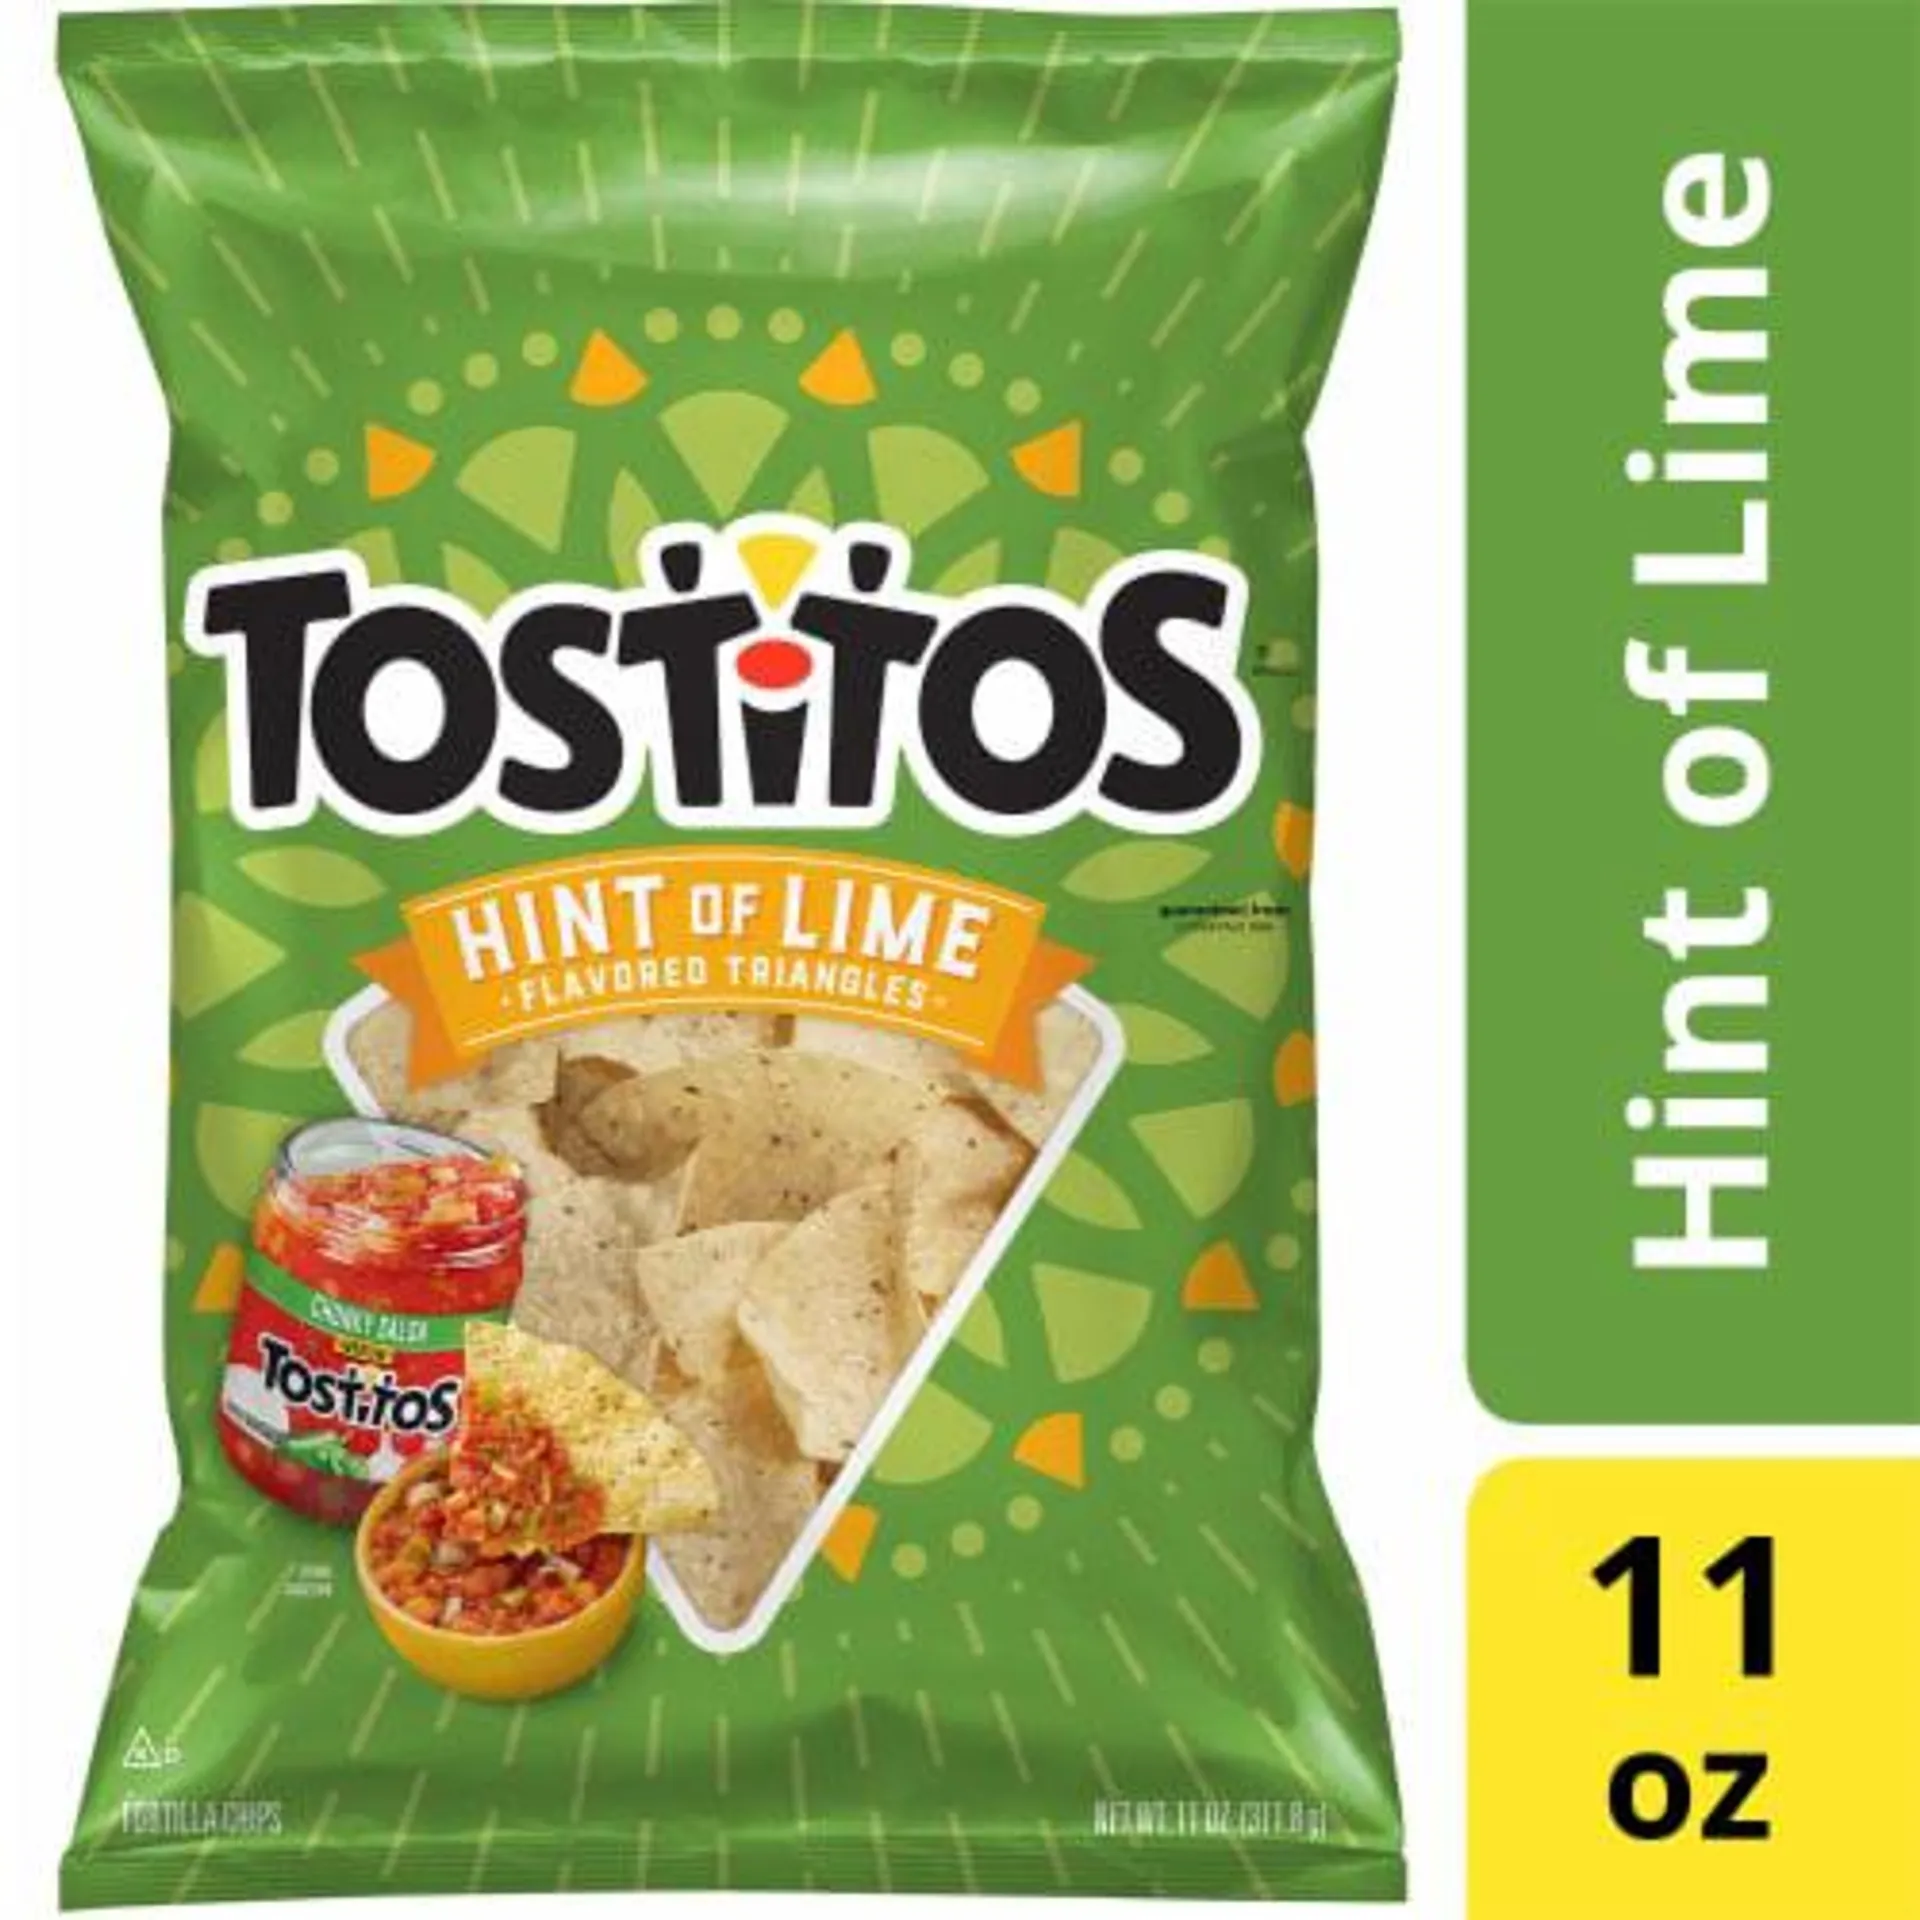 Tostitos® Hint of Lime Flavored Tortilla Chips